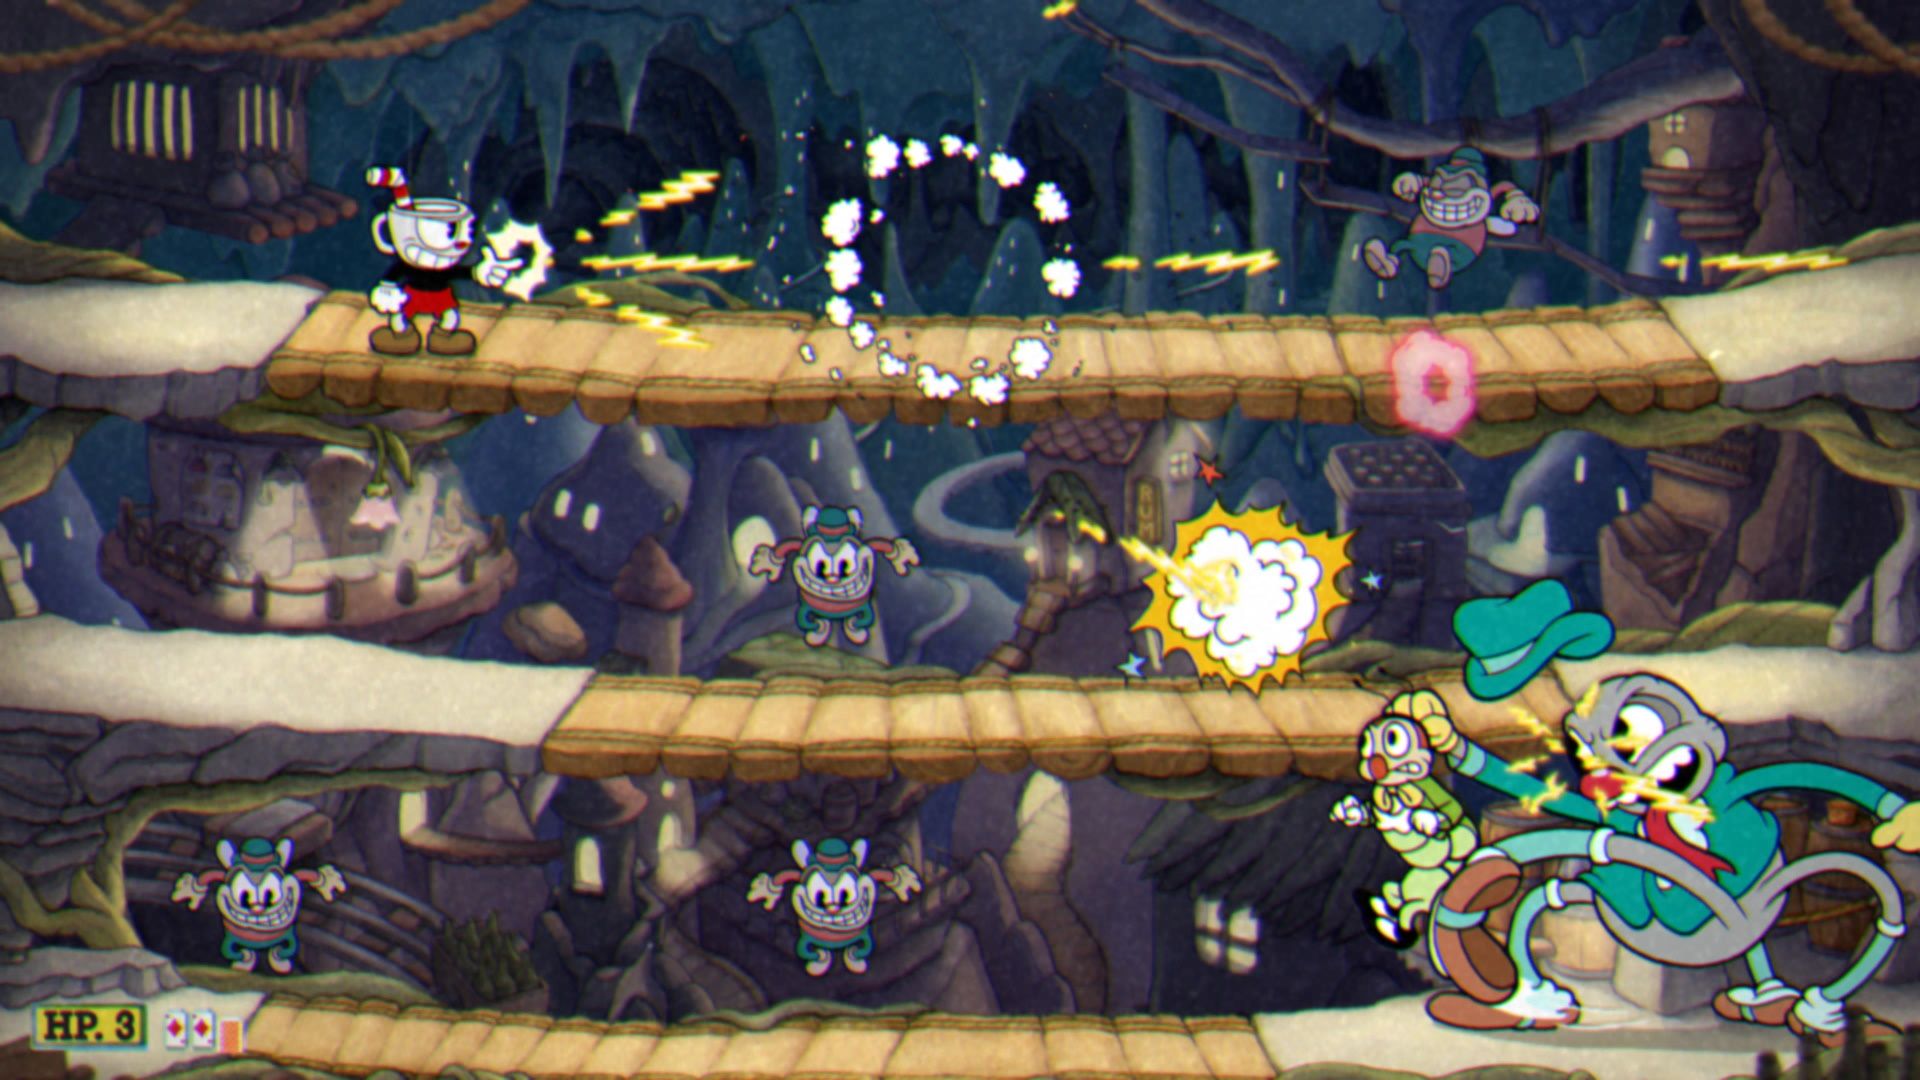 Cuphead The Delicious Course, The Moonshine Mob, Phase 1, Spider kicking Caterpillar